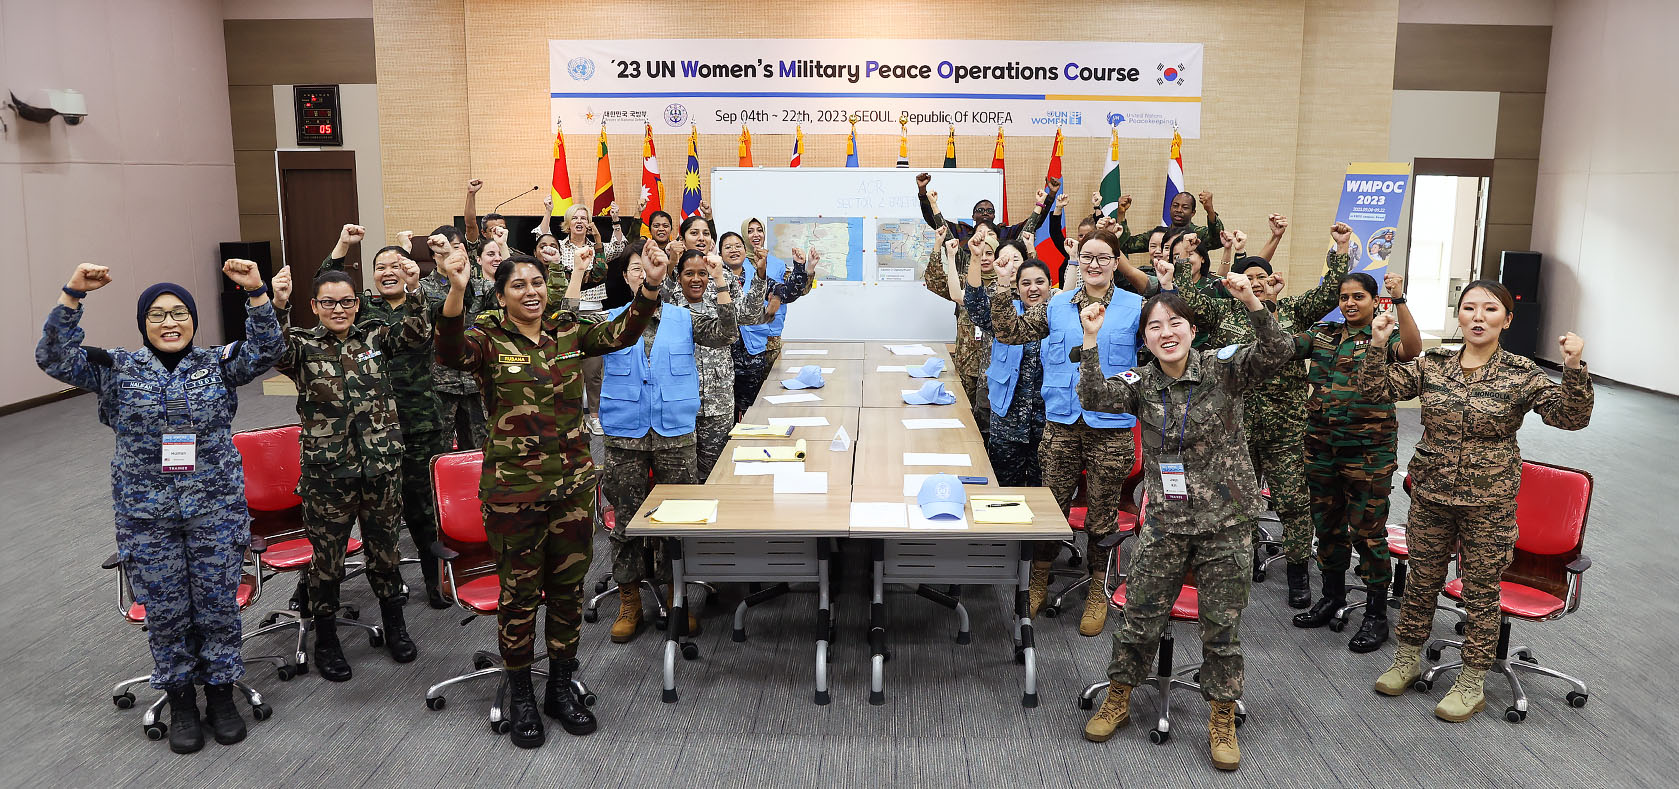 Group photo of participants of the Women’s Military Peace Operations Course. Photo: UN Women/Chanyoung Park